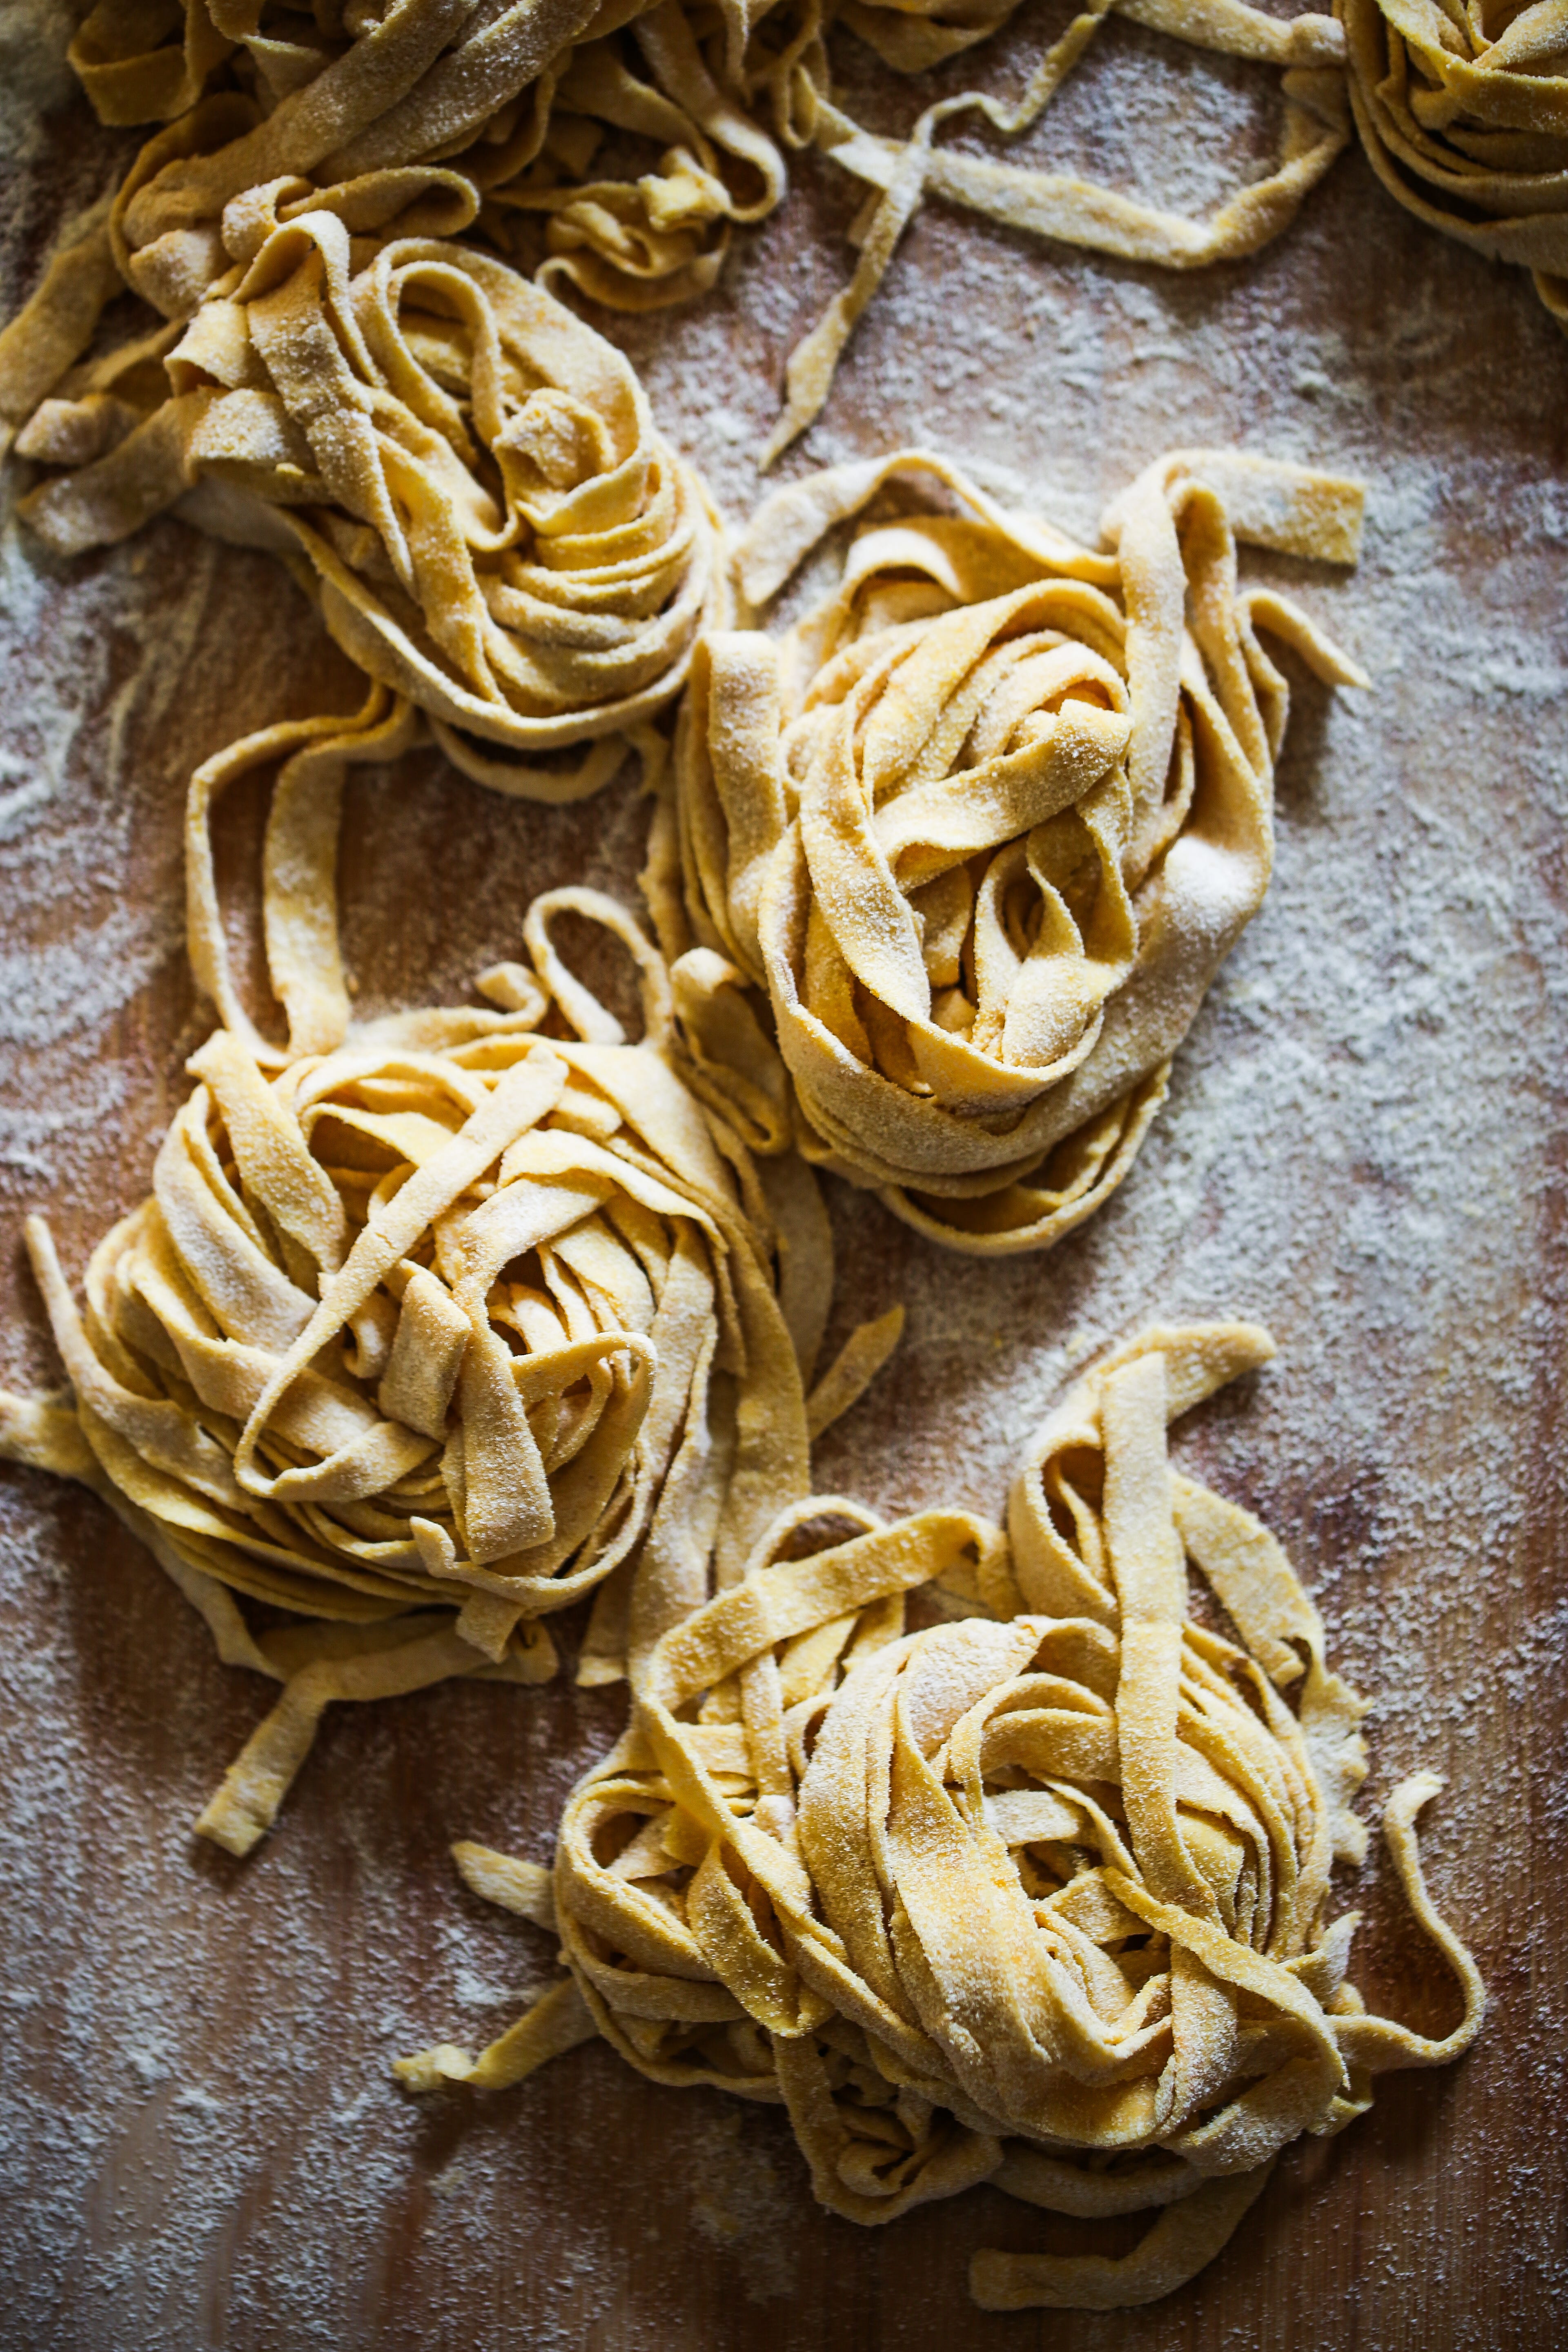 Here's everything you need to make fresh pasta at home, Wellbeing